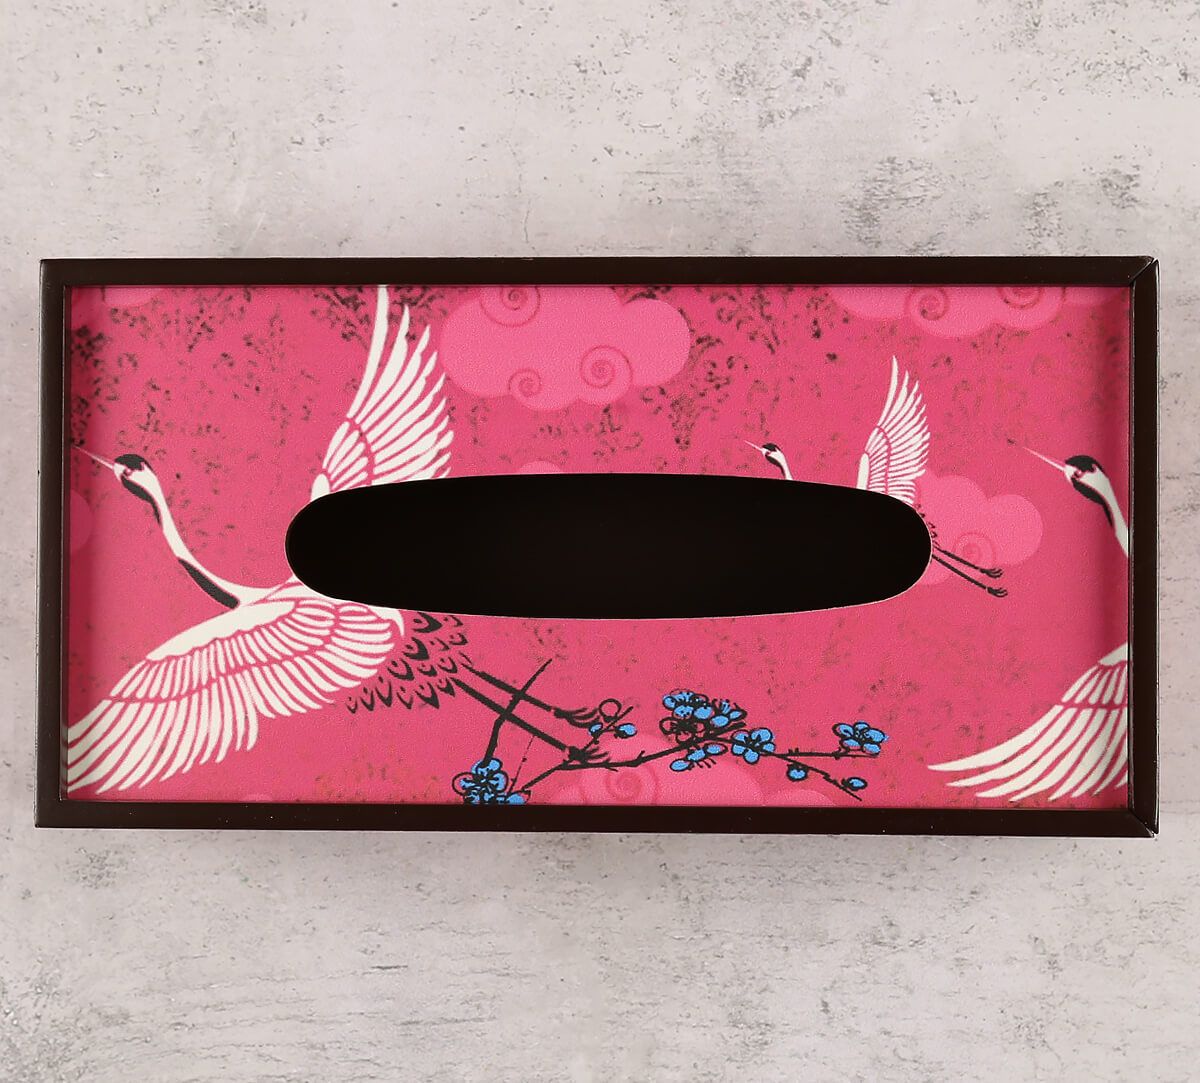 India Circus by Krsnaa Mehta Legend of the Cranes Tissue Box Holder